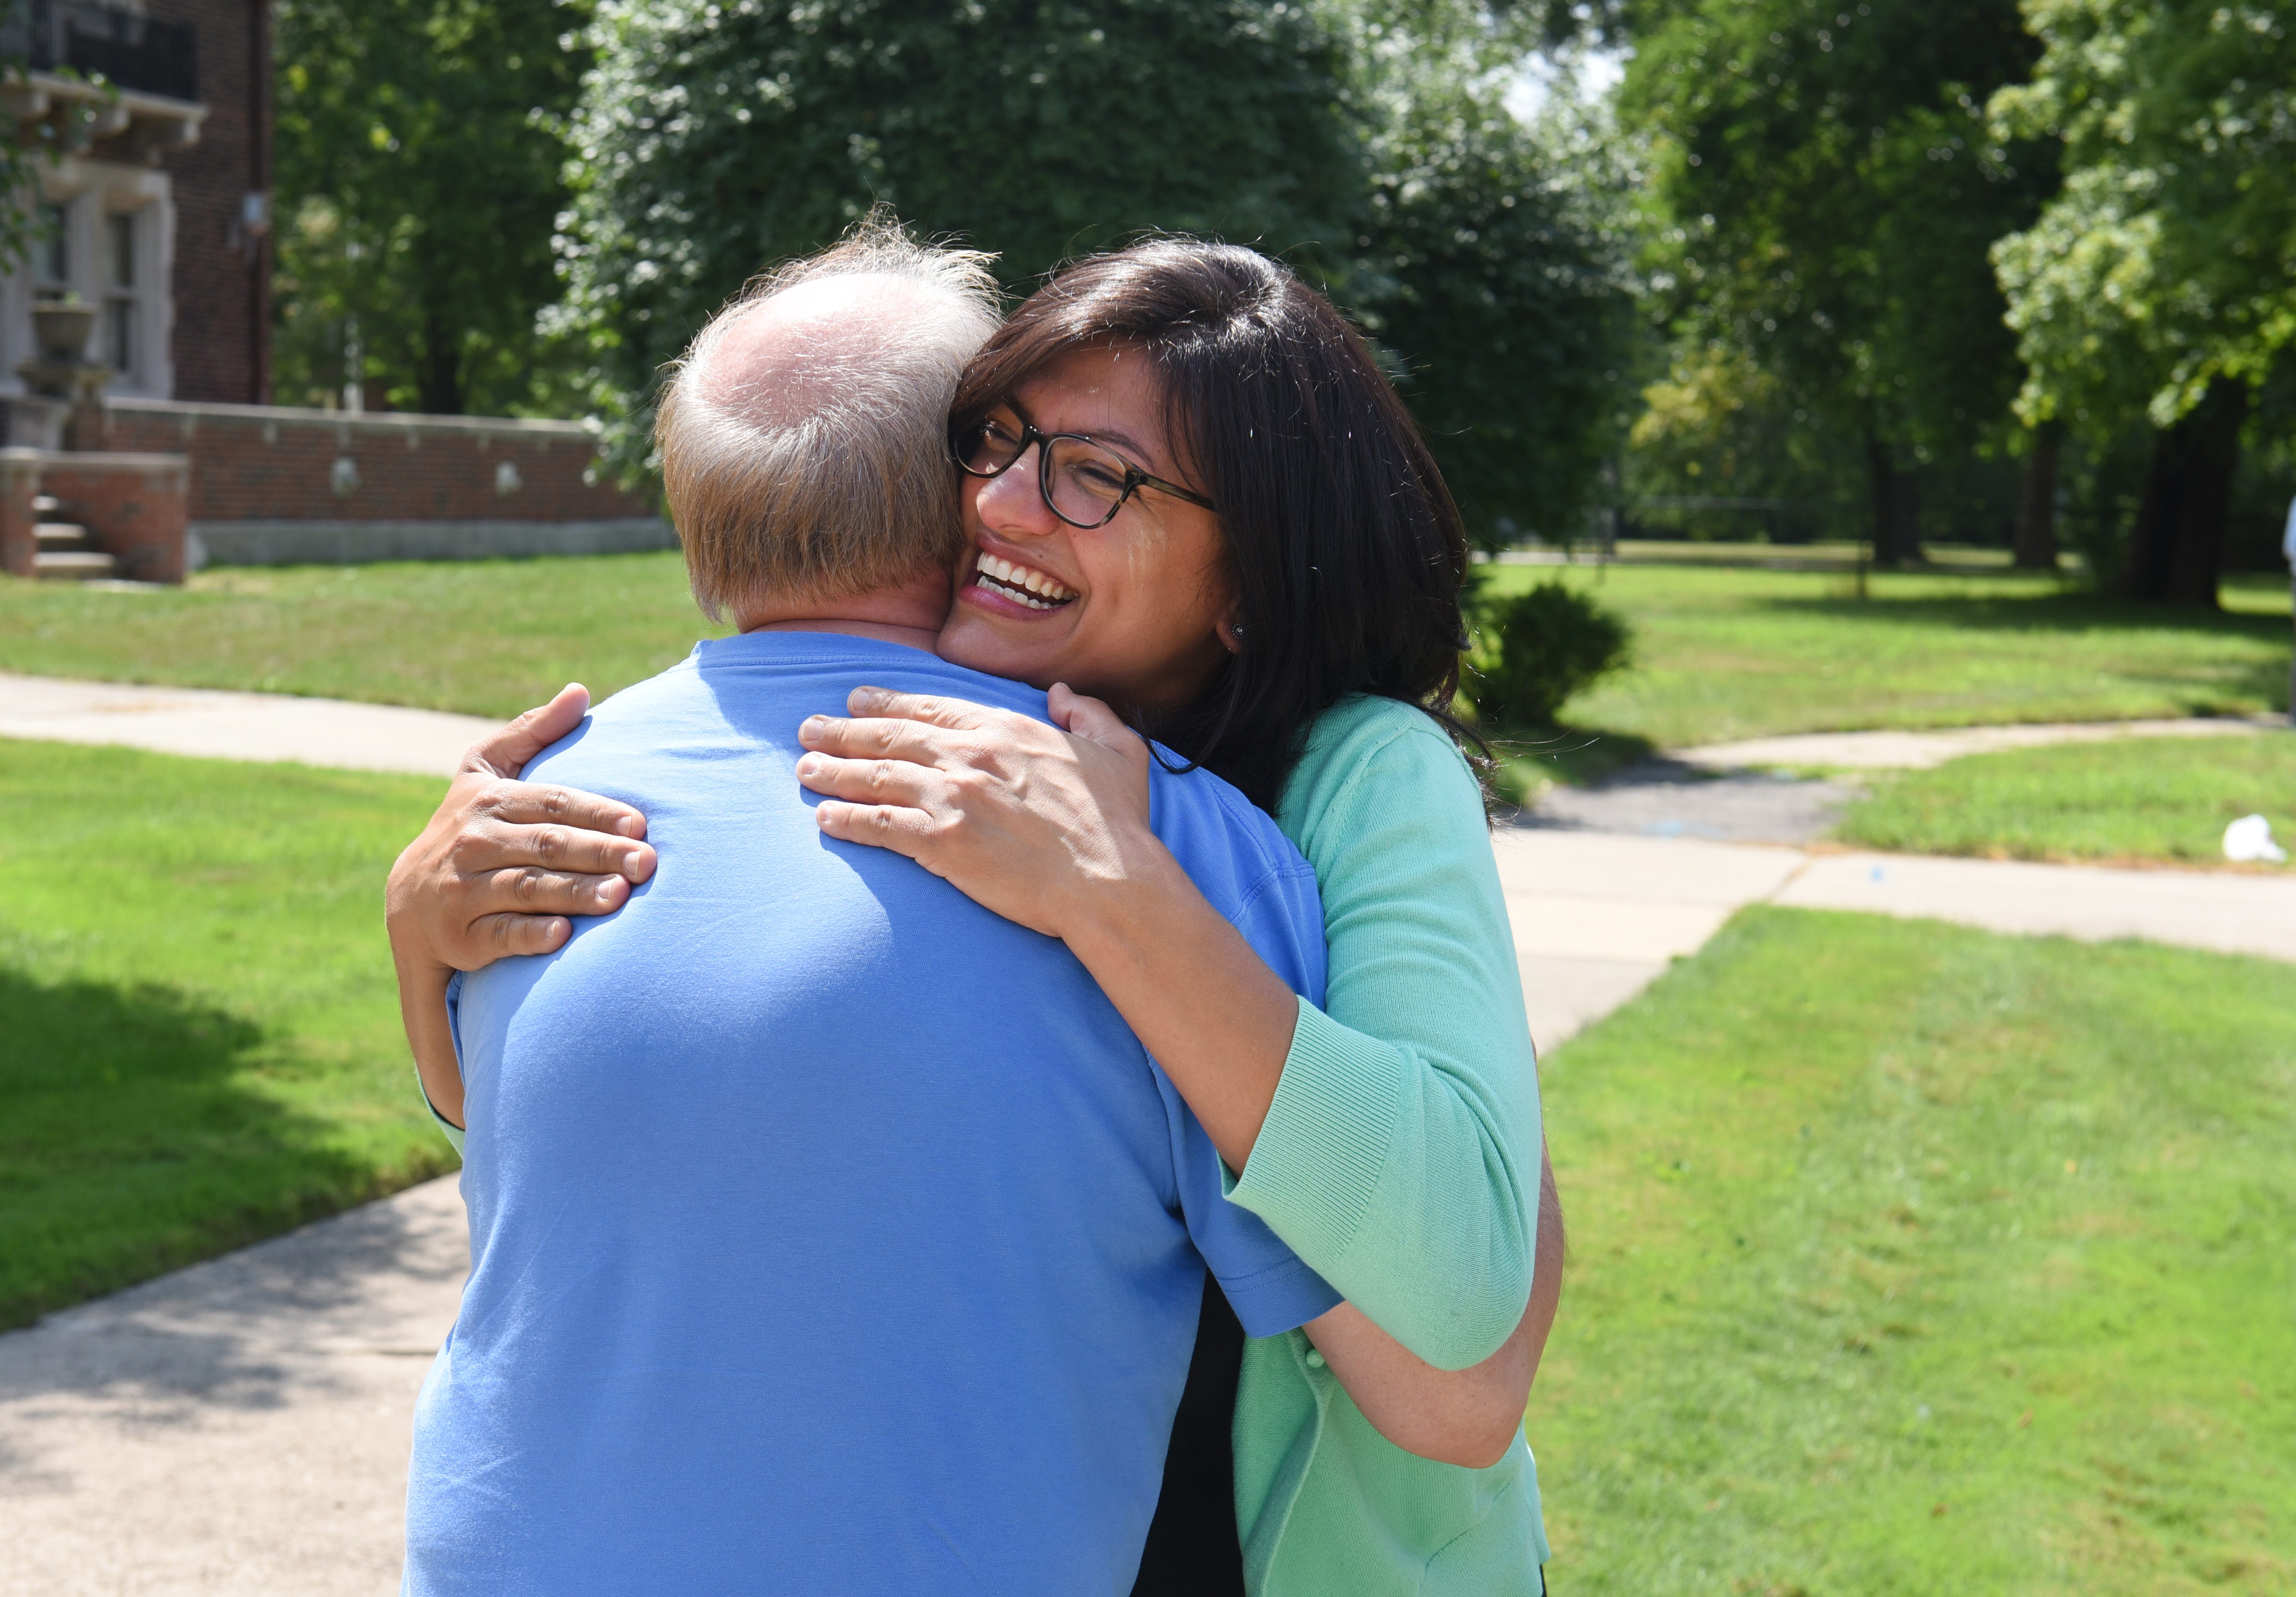 Rashida Tlaib is congratulated by a supporter after she was interviewed by local media on Wednesday, August 8, 2018 in Detroit about being the first Muslim woman elected to Congress.